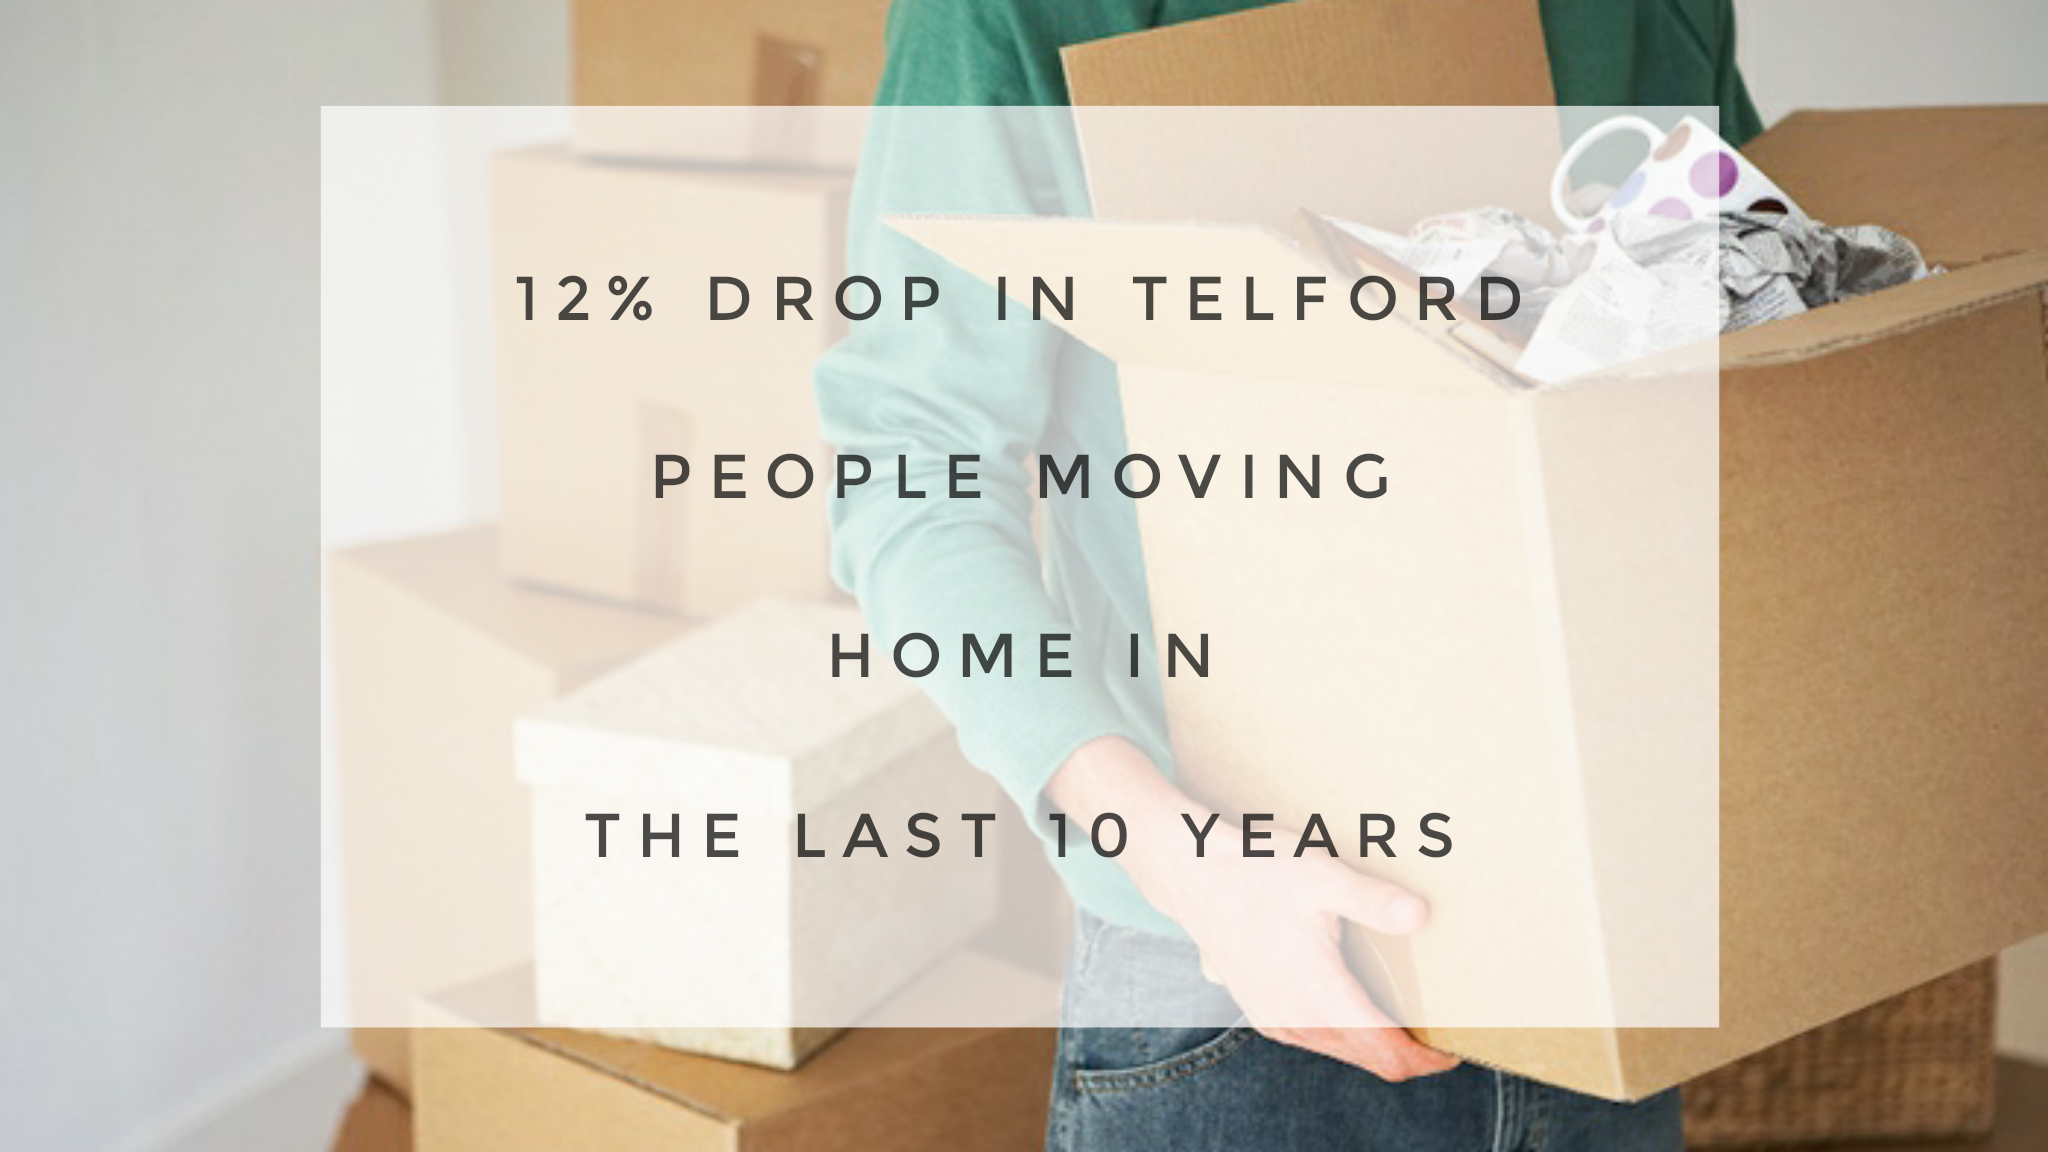 12.9% Drop in Telford People Moving Home in the Last 10 Years